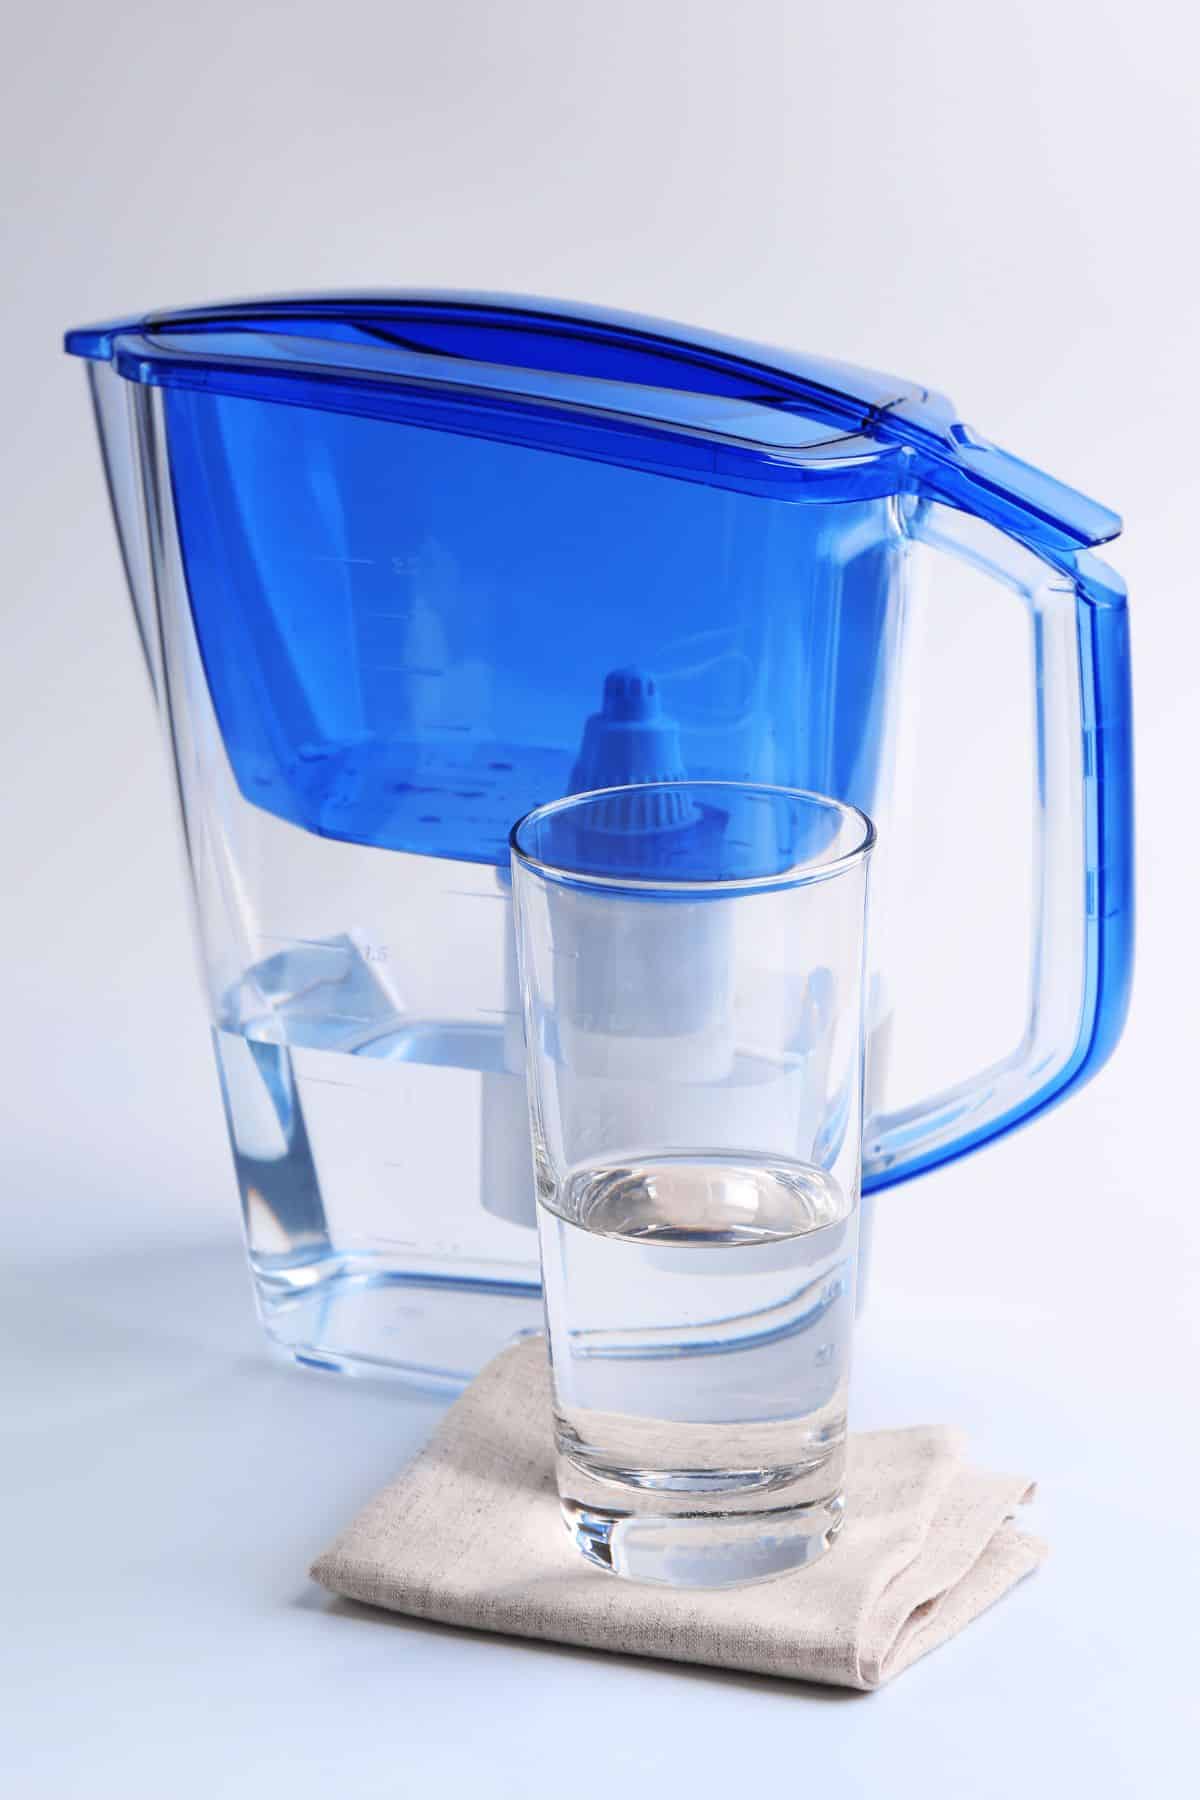 a water filter pitcher behind a glass of water.